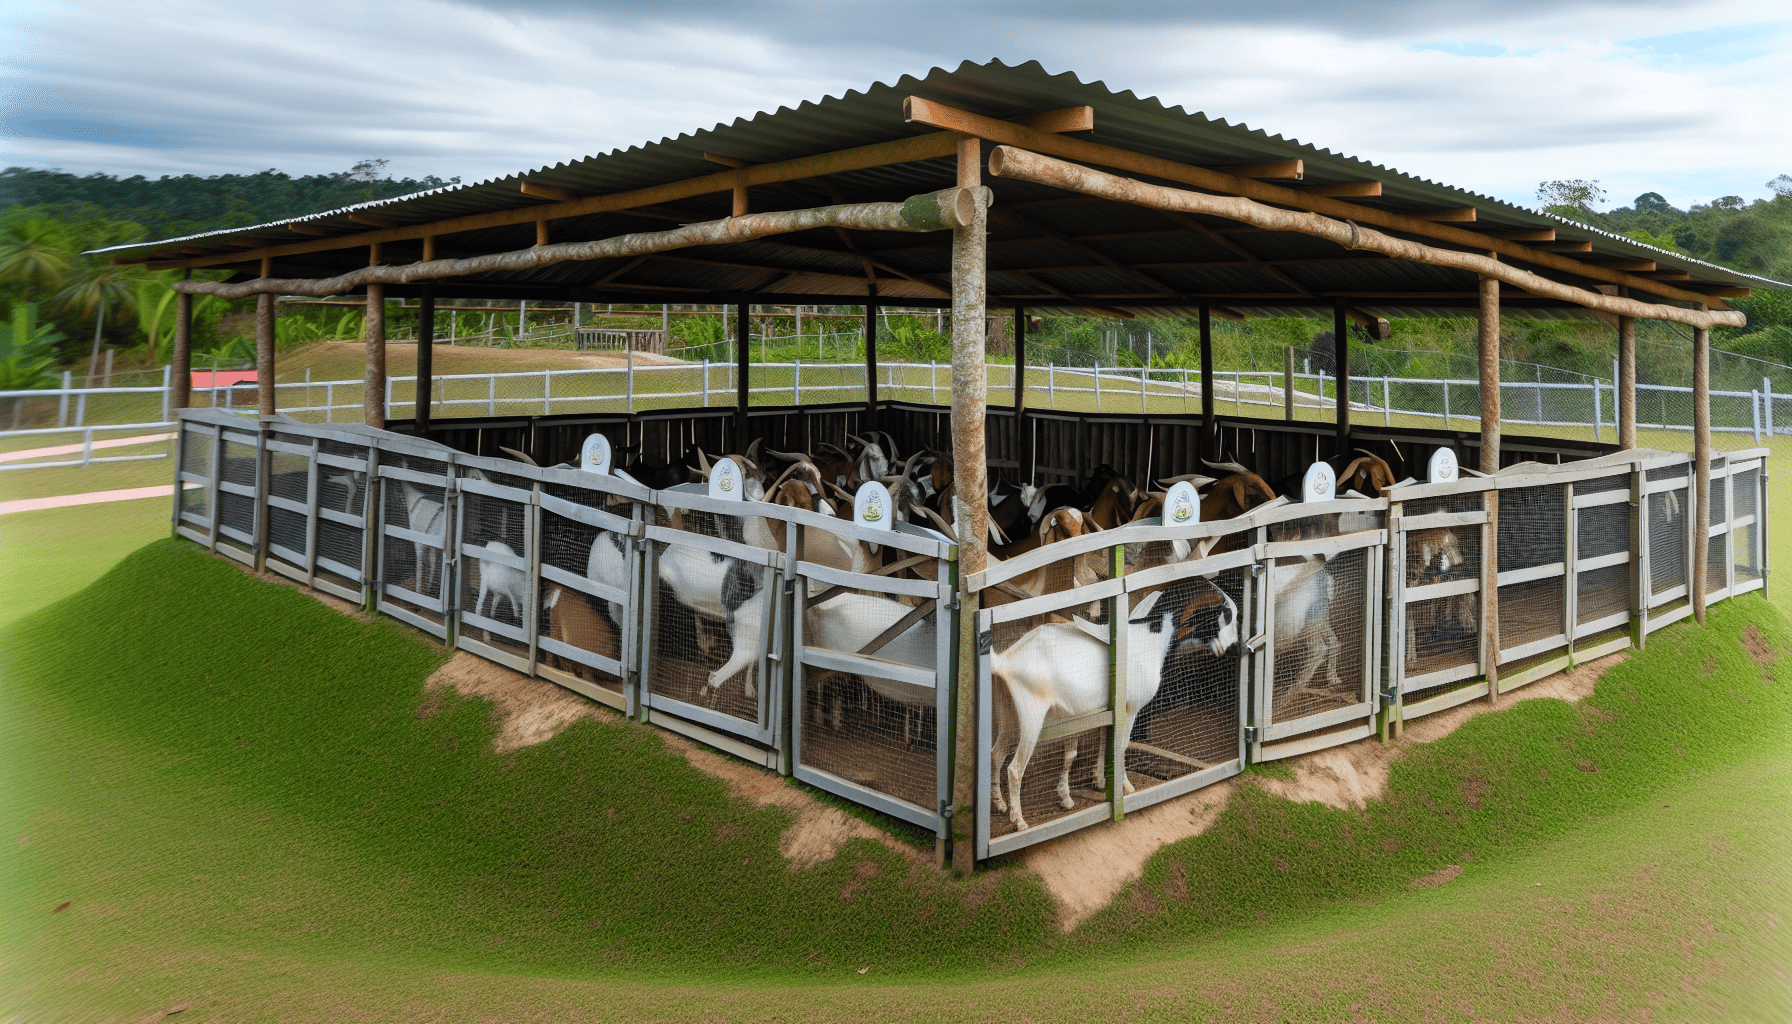 A well-built goat shelter with sturdy fencing